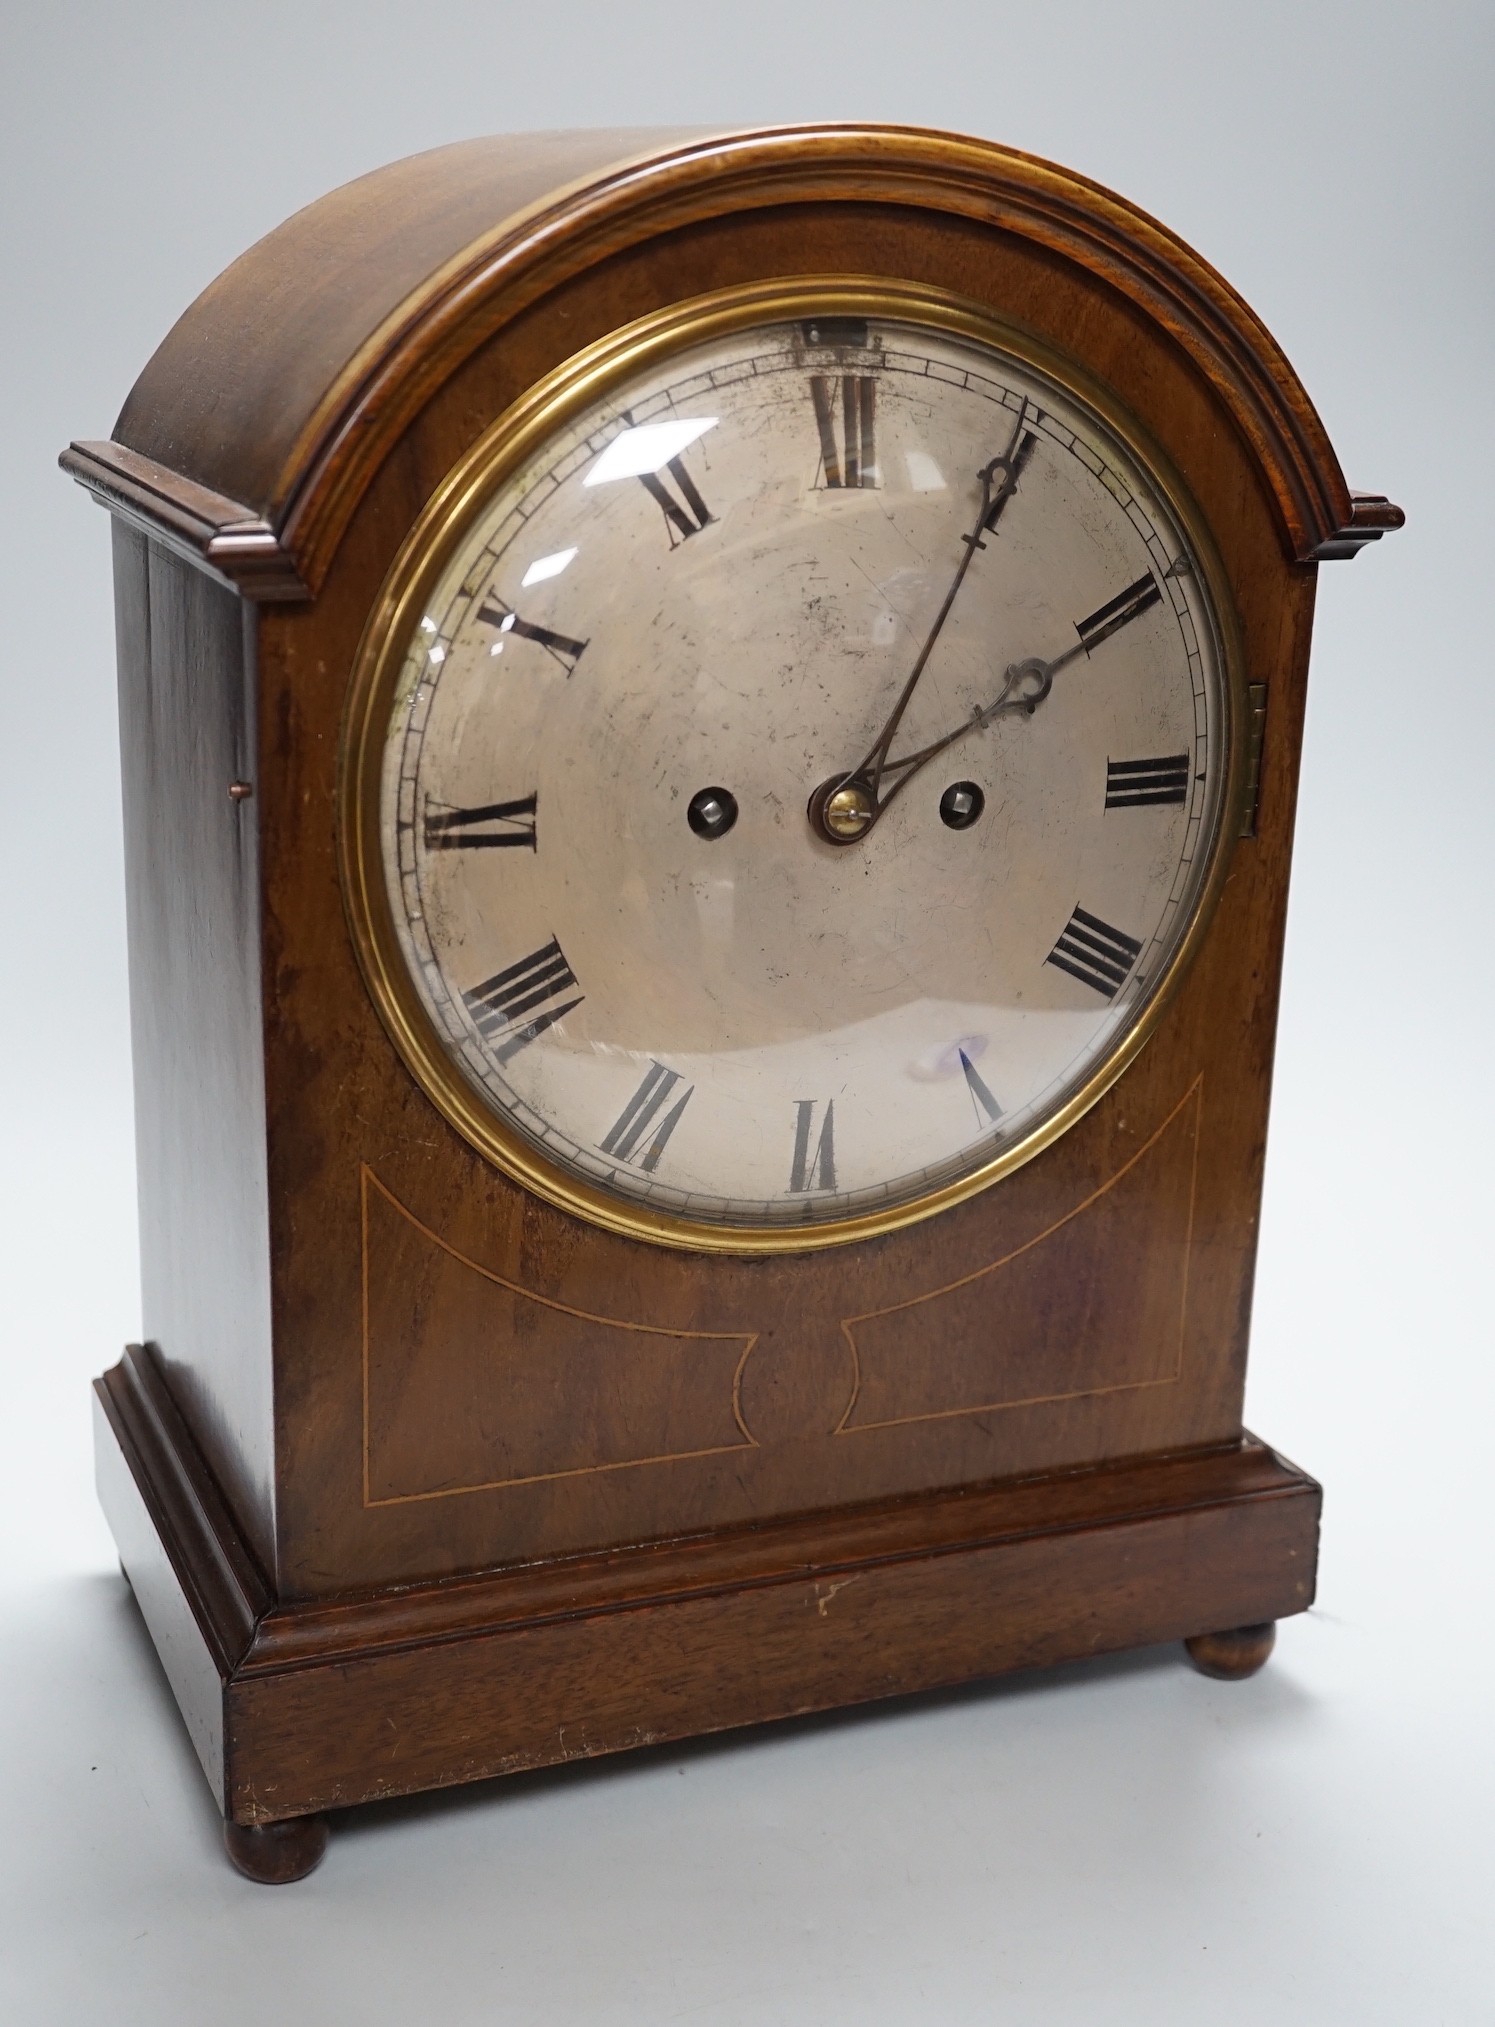 A late 19th/early 20th century mahogany mantel clock with German striking movement and convex silvered dial. 38cm tall